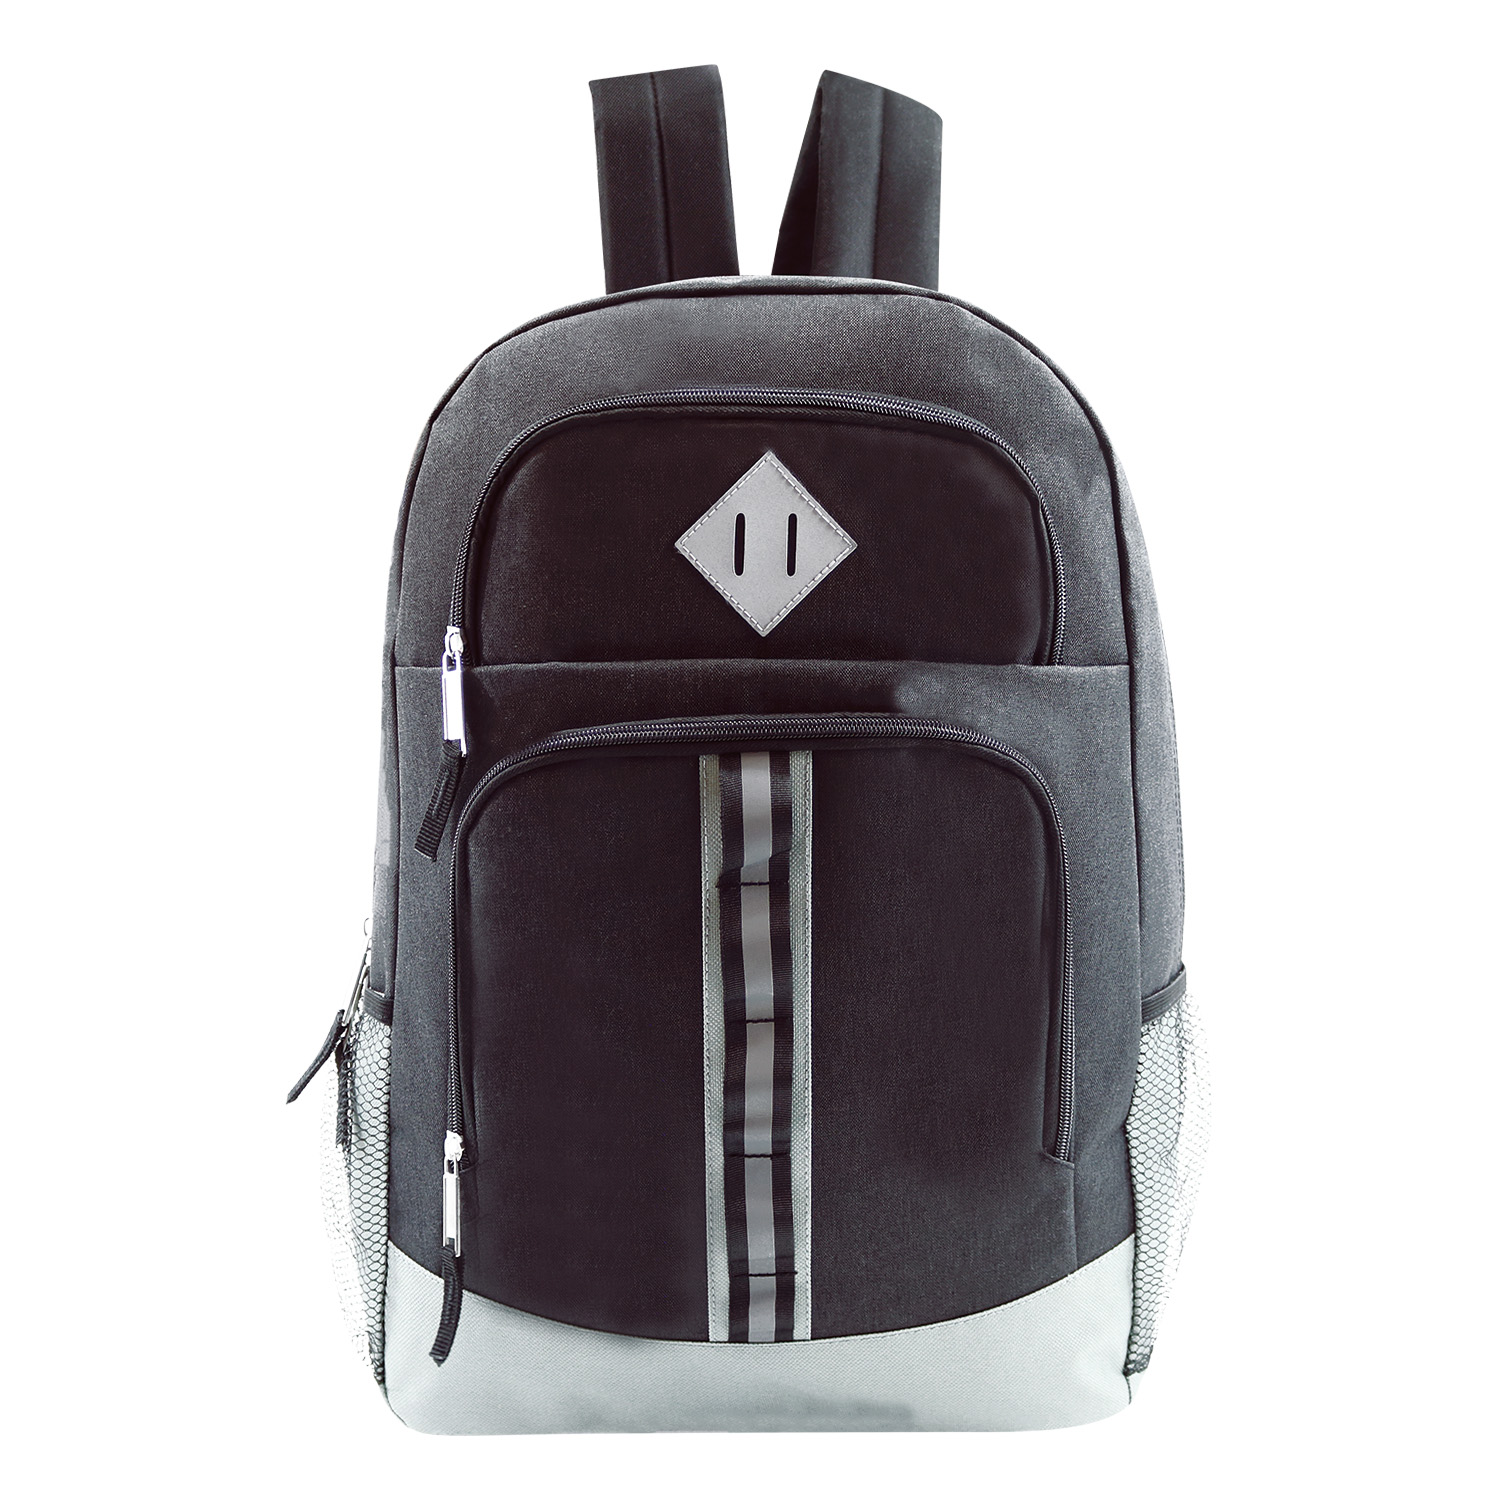 ''18'''' Deluxe Classic Style Two Tone BACKPACKs w/ Embroidered Locker Loops & Mesh Pockets - Black & G